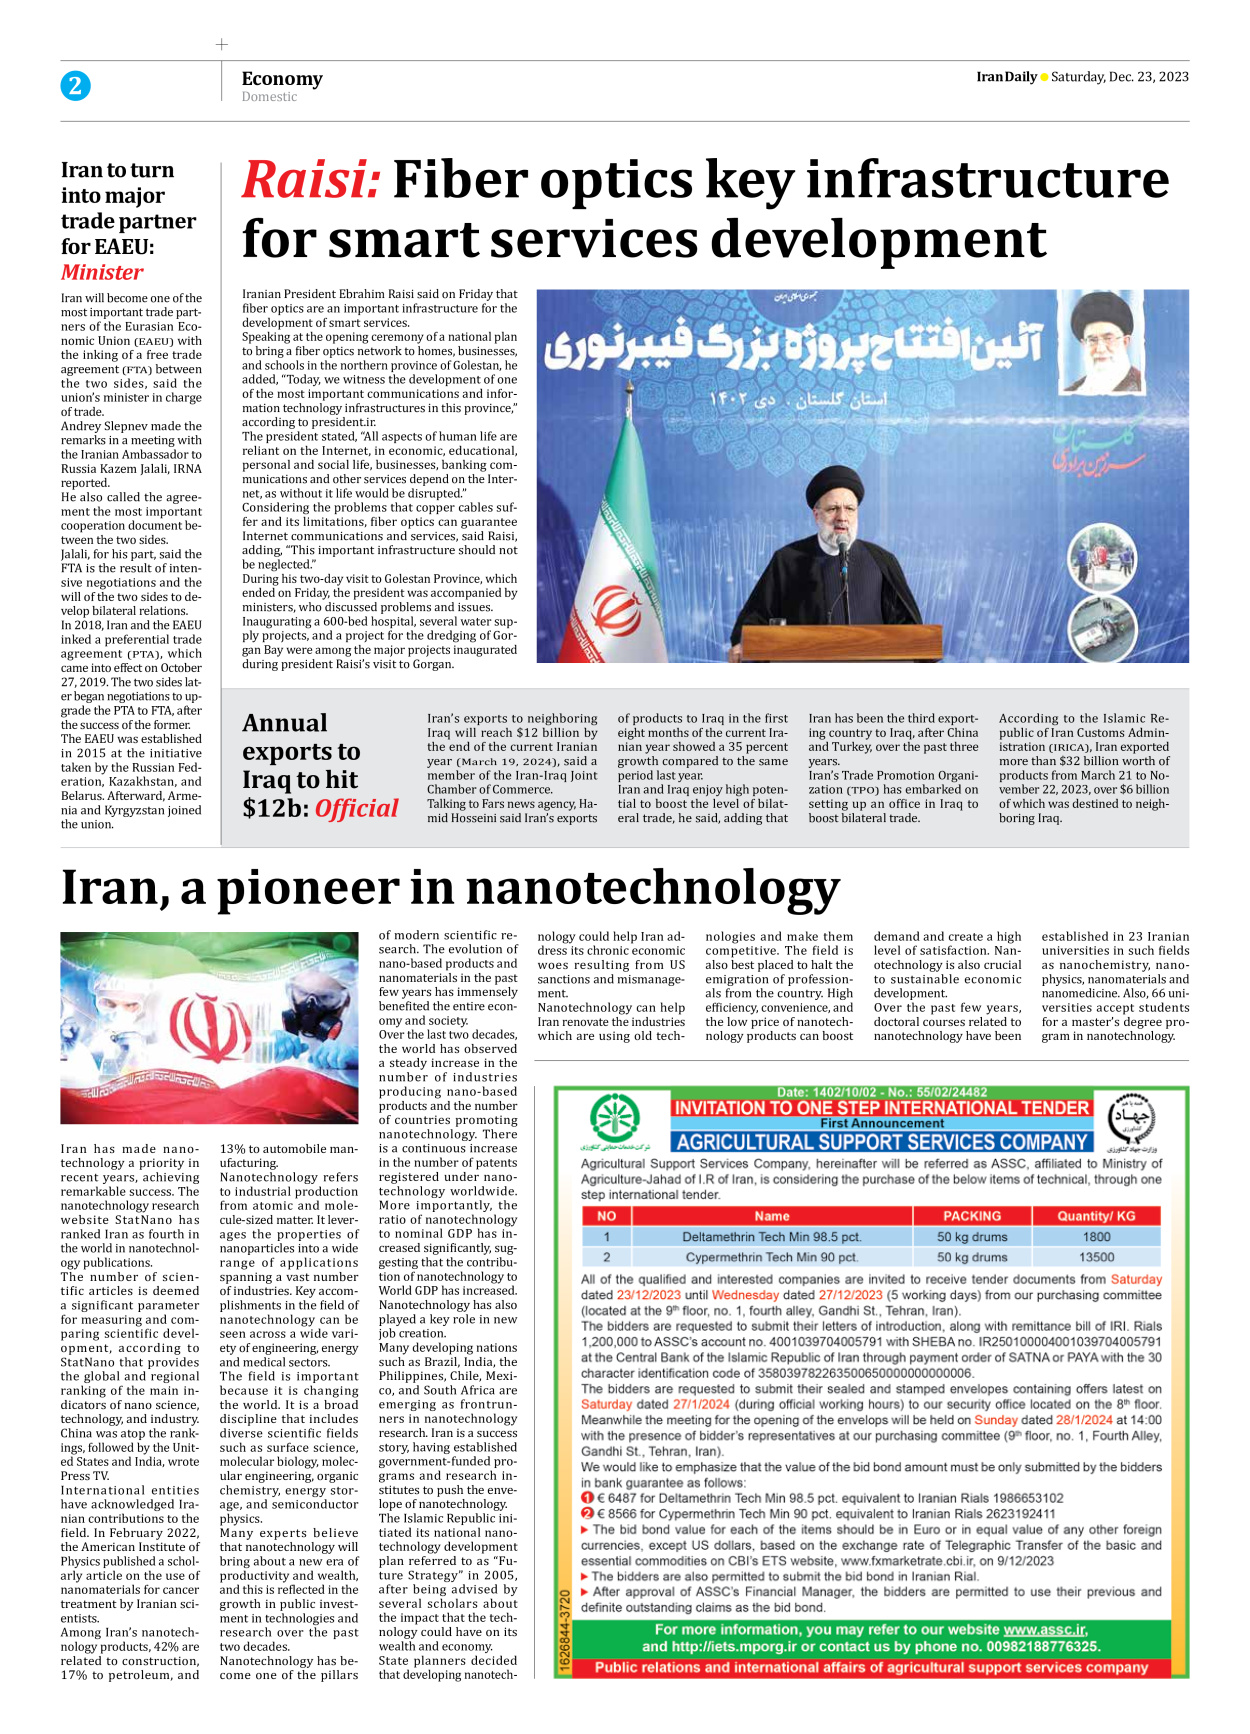 Iran Daily - Number Seven Thousand Four Hundred and Sixty Five - 23 December 2023 - Page 2